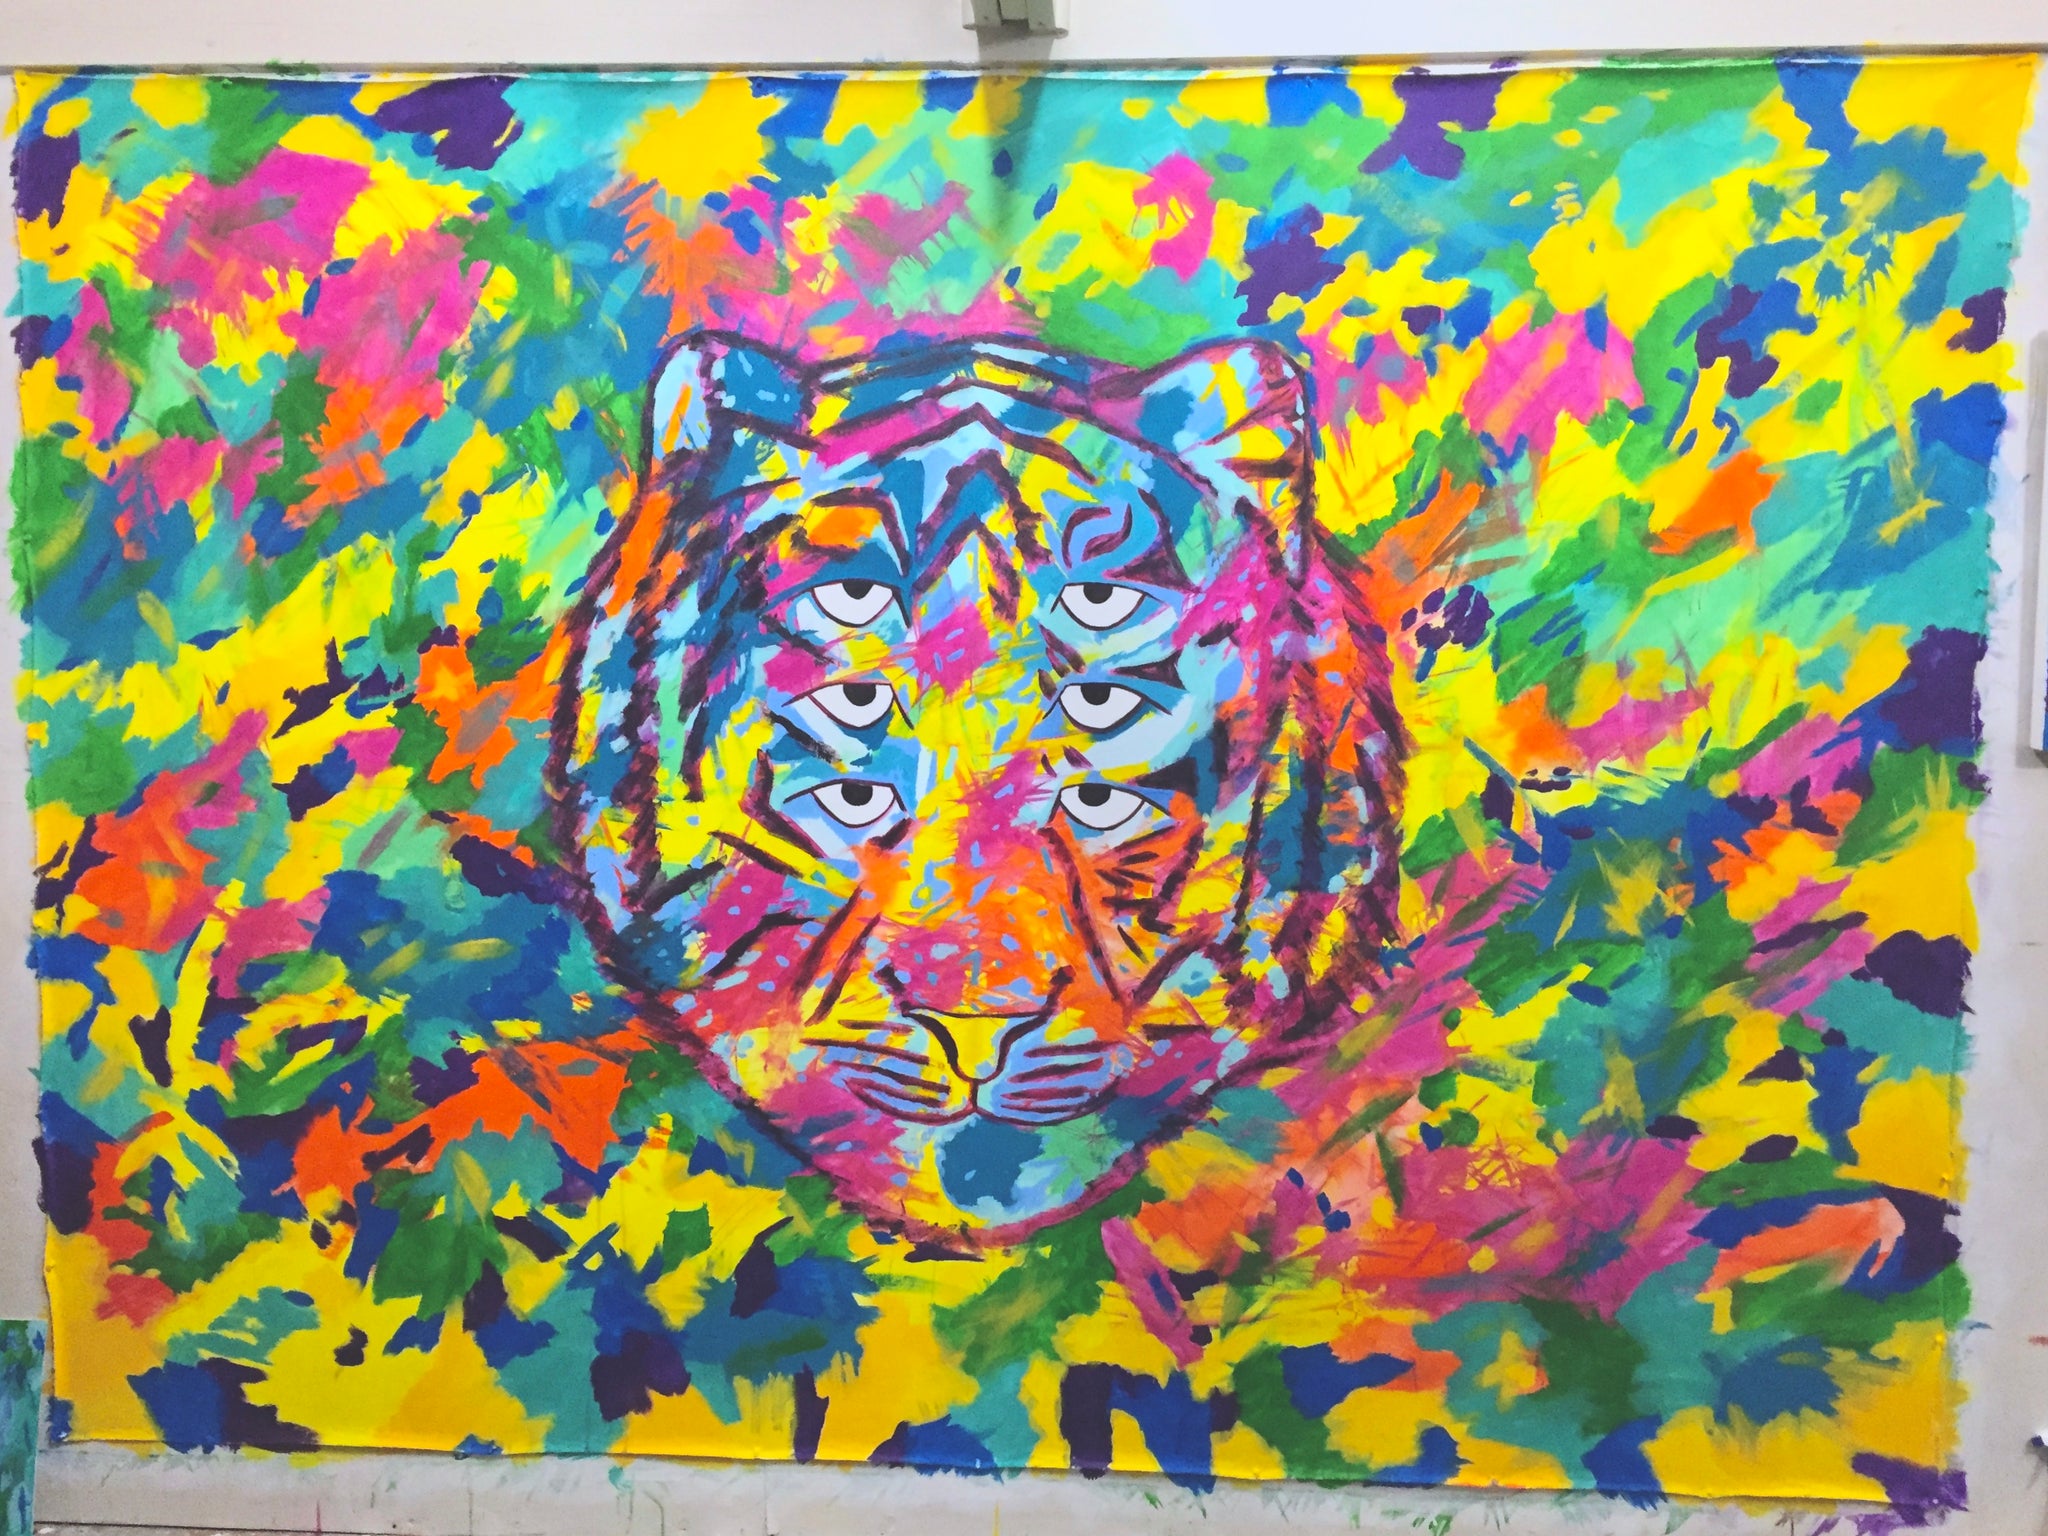 Six Eyed Rainbow Tiger, original acrylic painting on unstretched canvas 84" x 110"